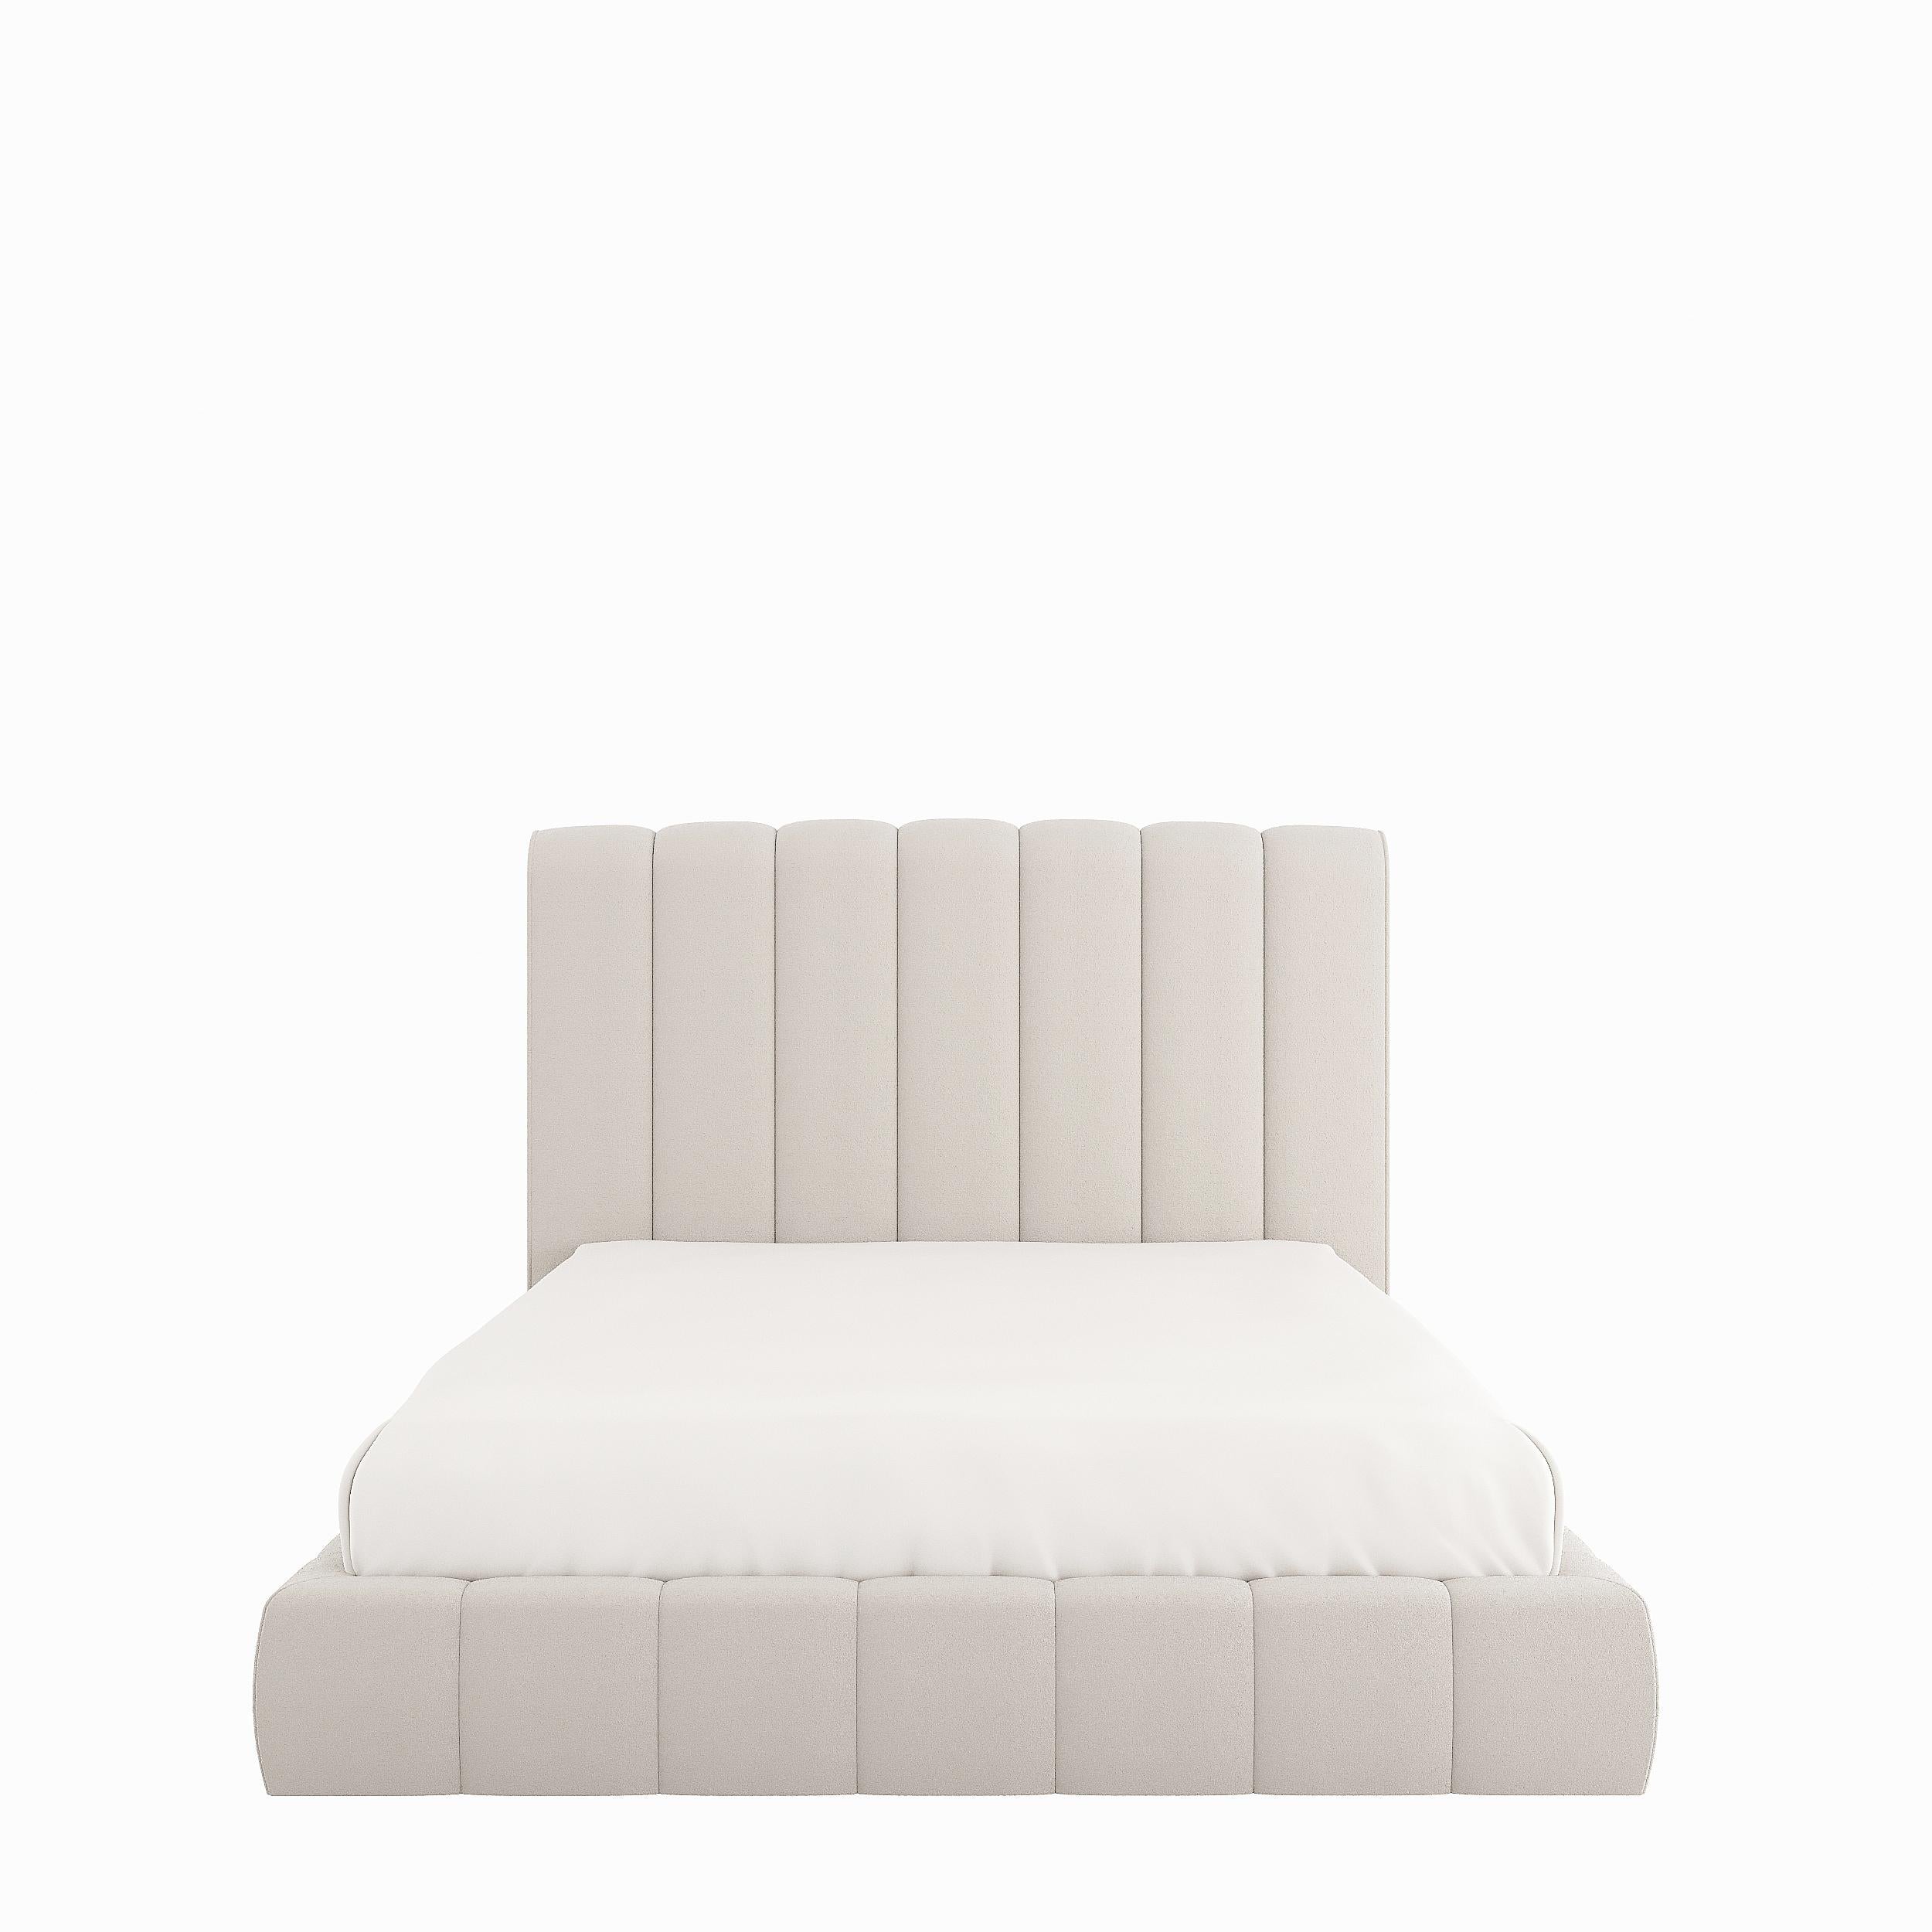 Lacquered BRISA bed with upholstered headboard and base For Sale